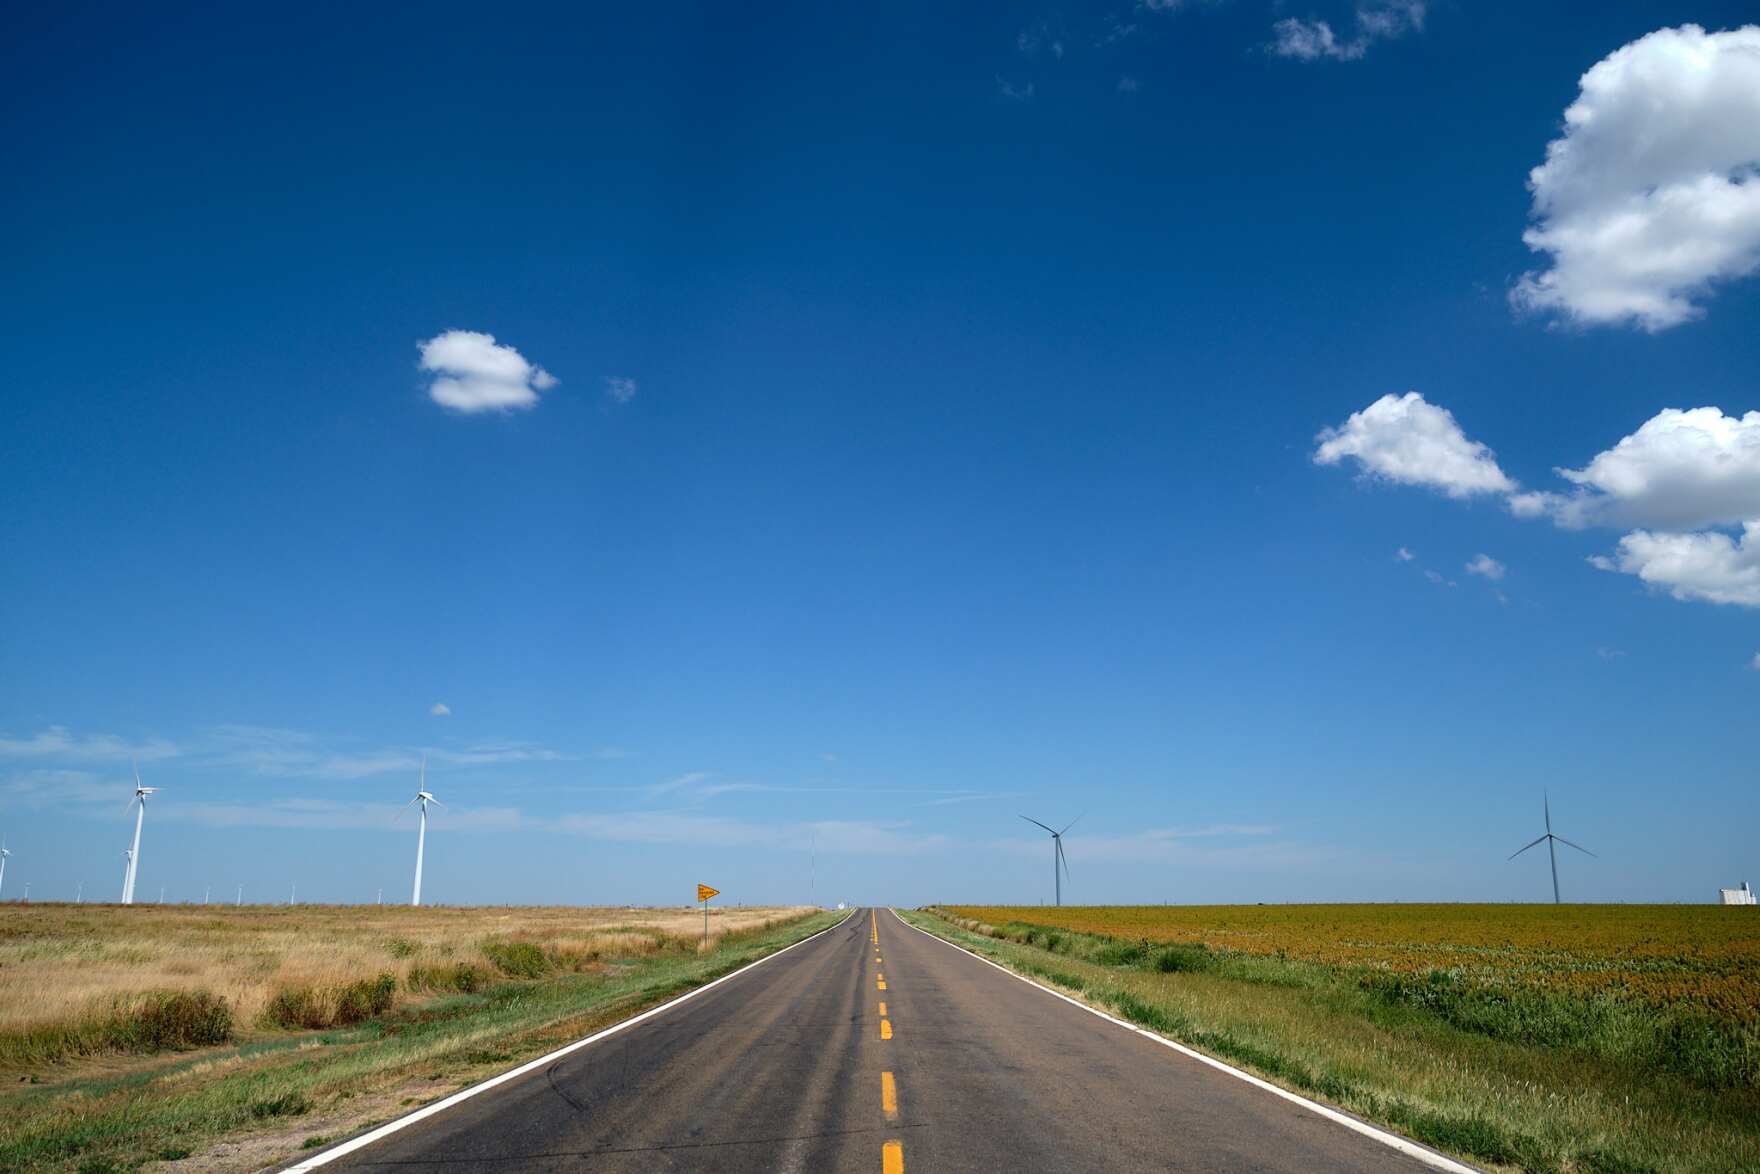 a wide landscape shot take from the middle of a road dividing a large field on a nearly cloudless day. four wind turbines, two on each side of the road, are off in the distance